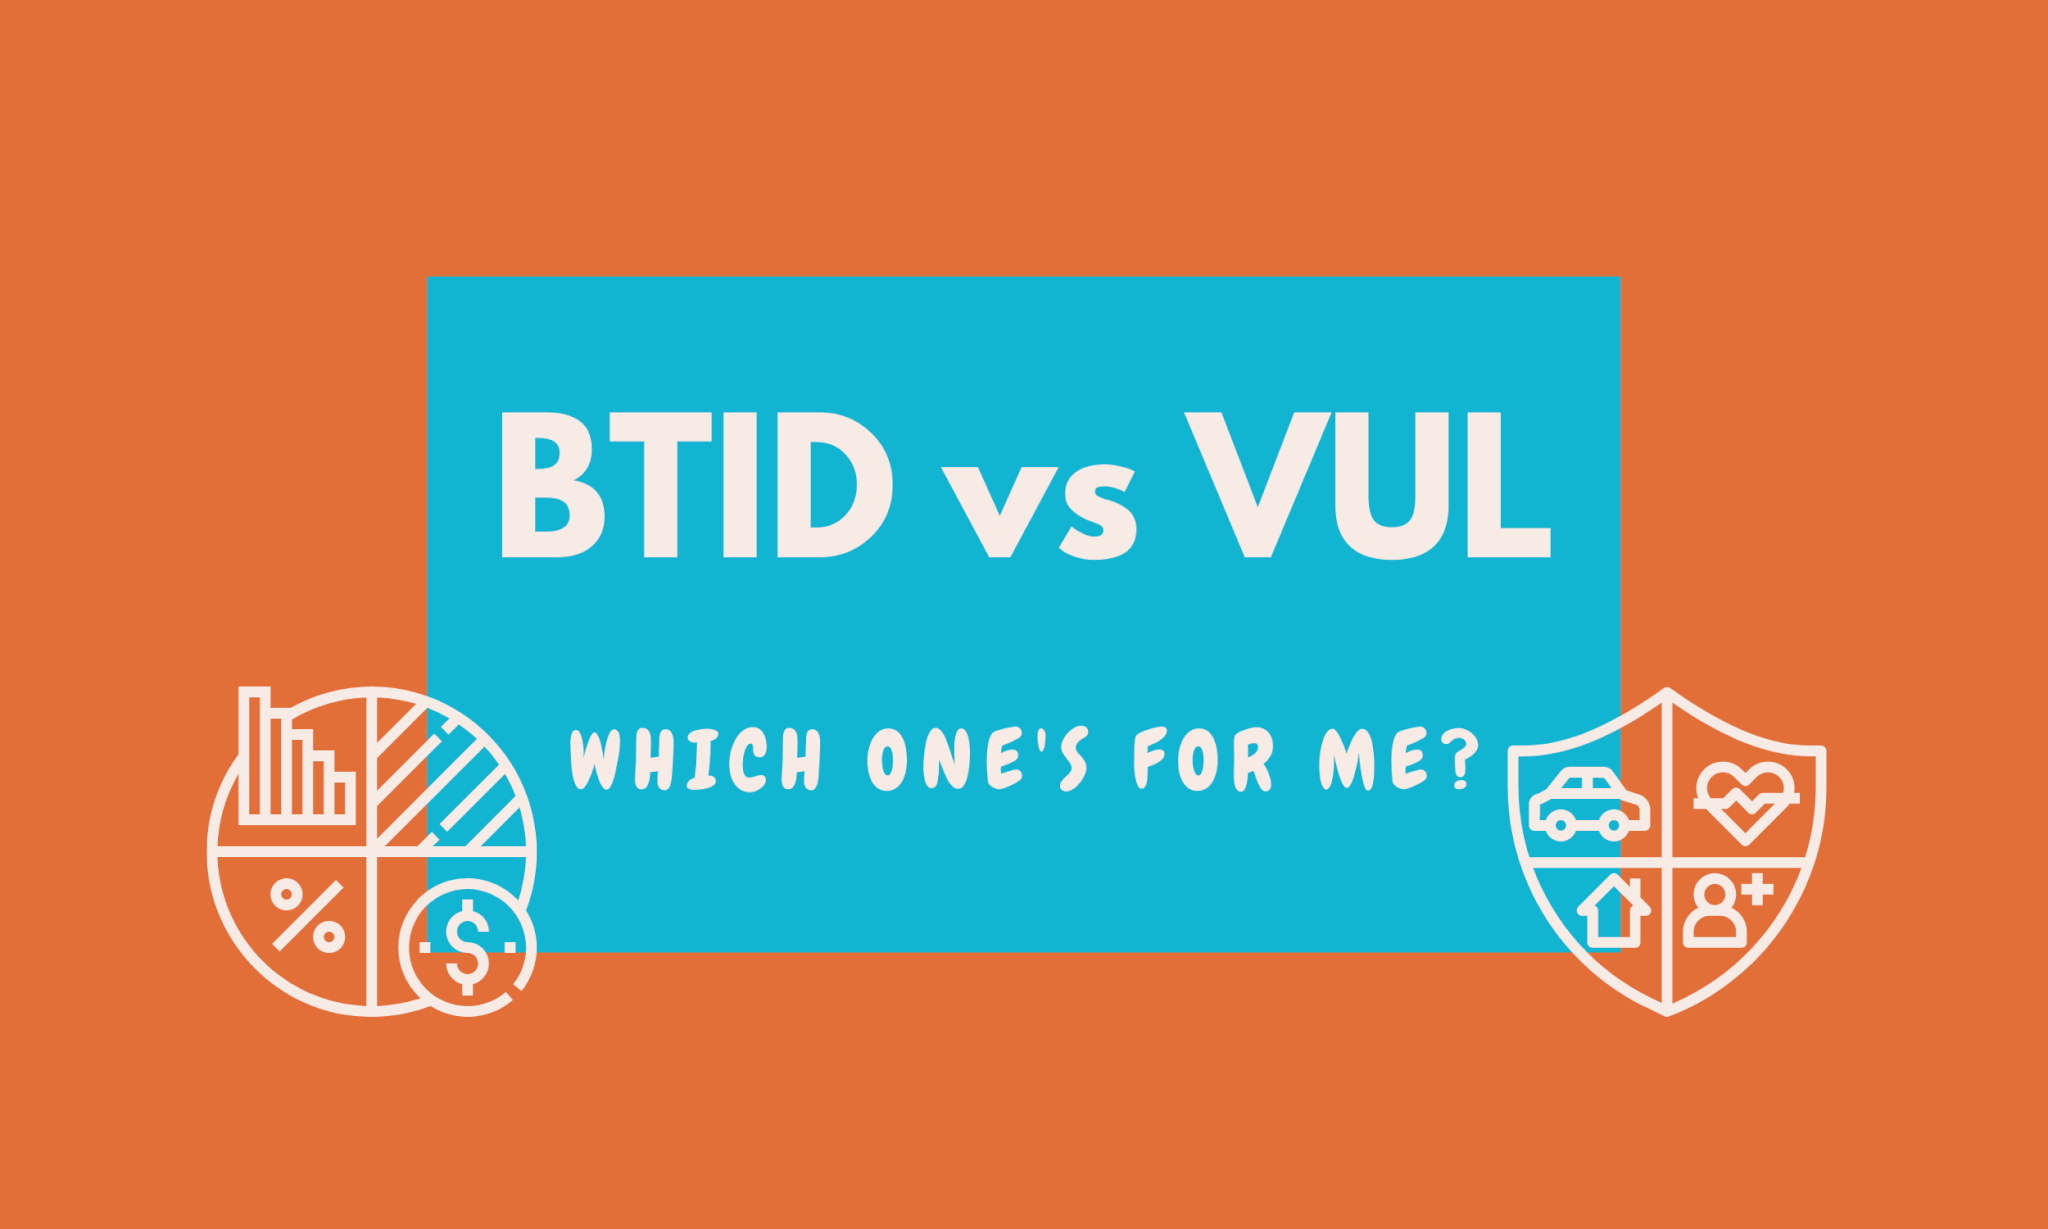 BTID vs VUL: Which One’s For Me?